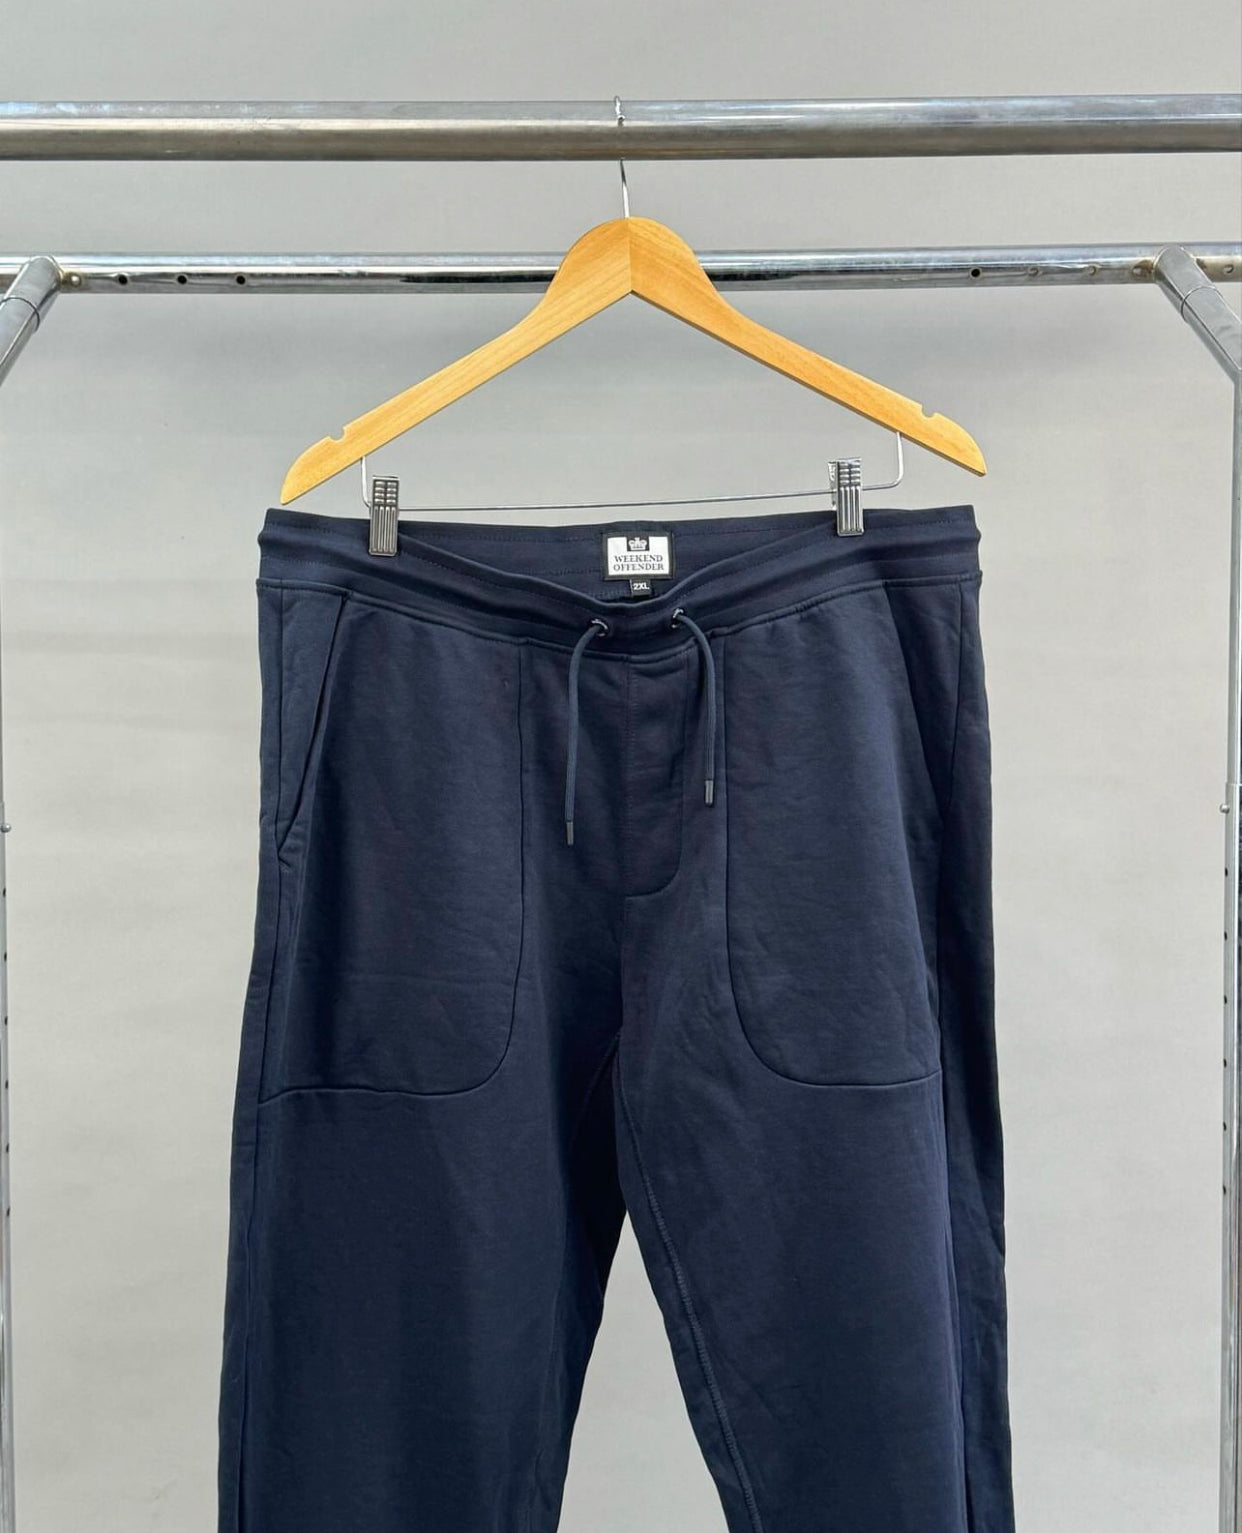 Weekend offender jogger pant in navy